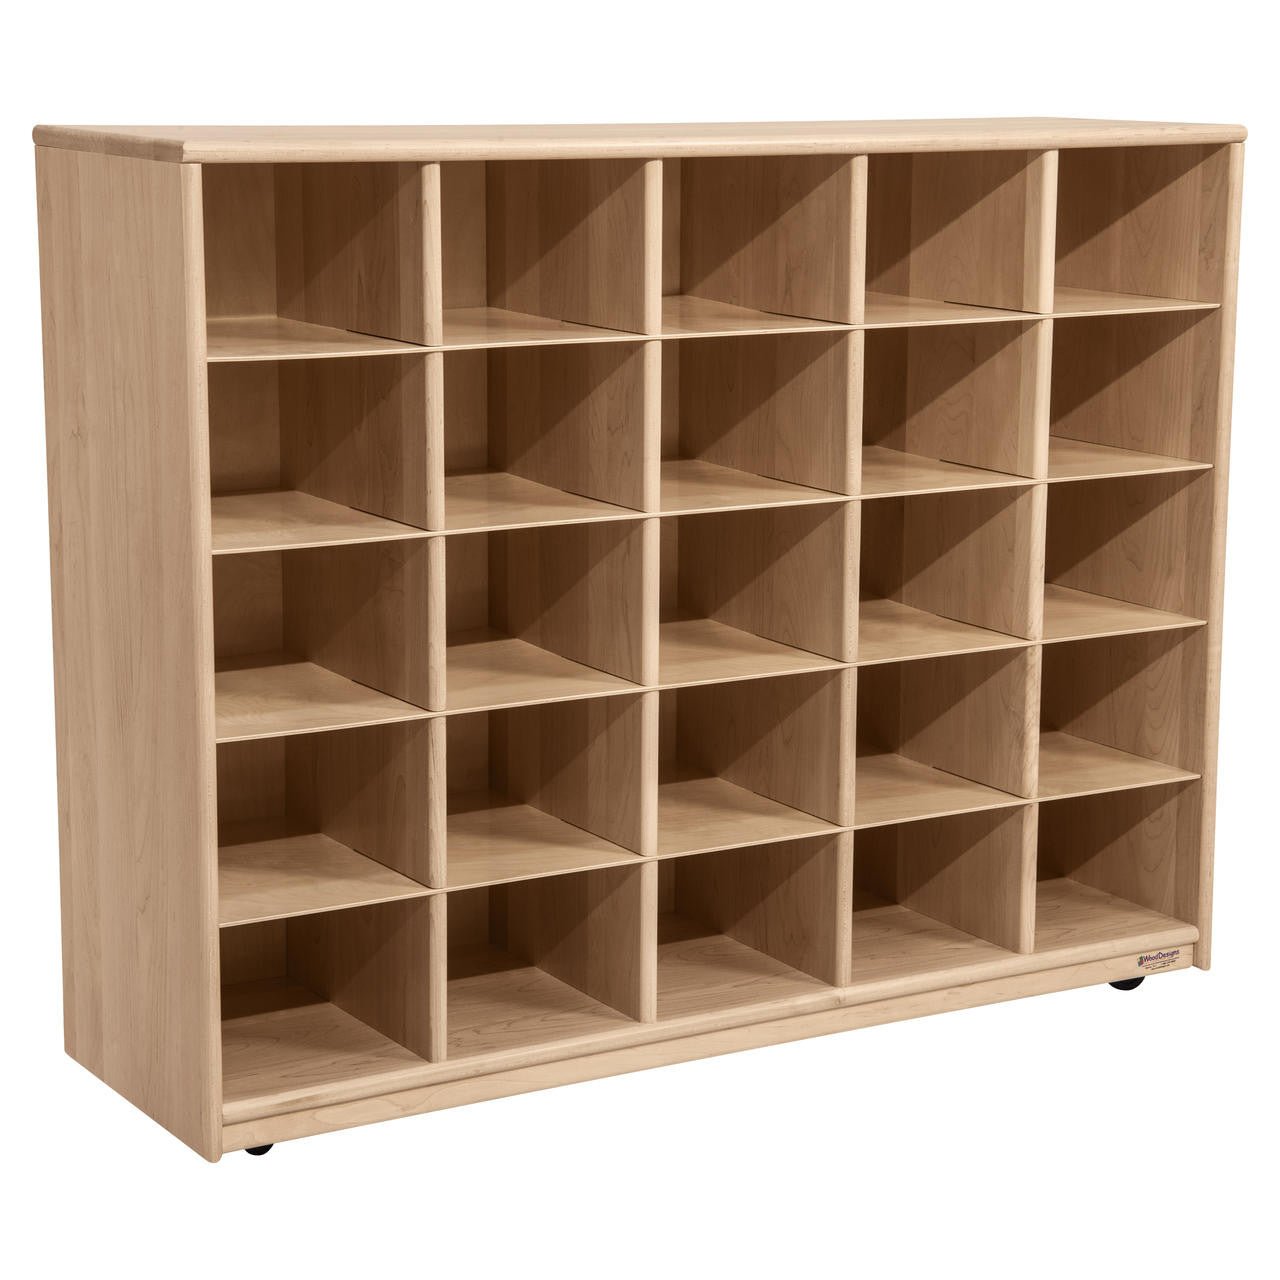 Maple Heritage (25) Cubby Tray Storage with Translucent Trays